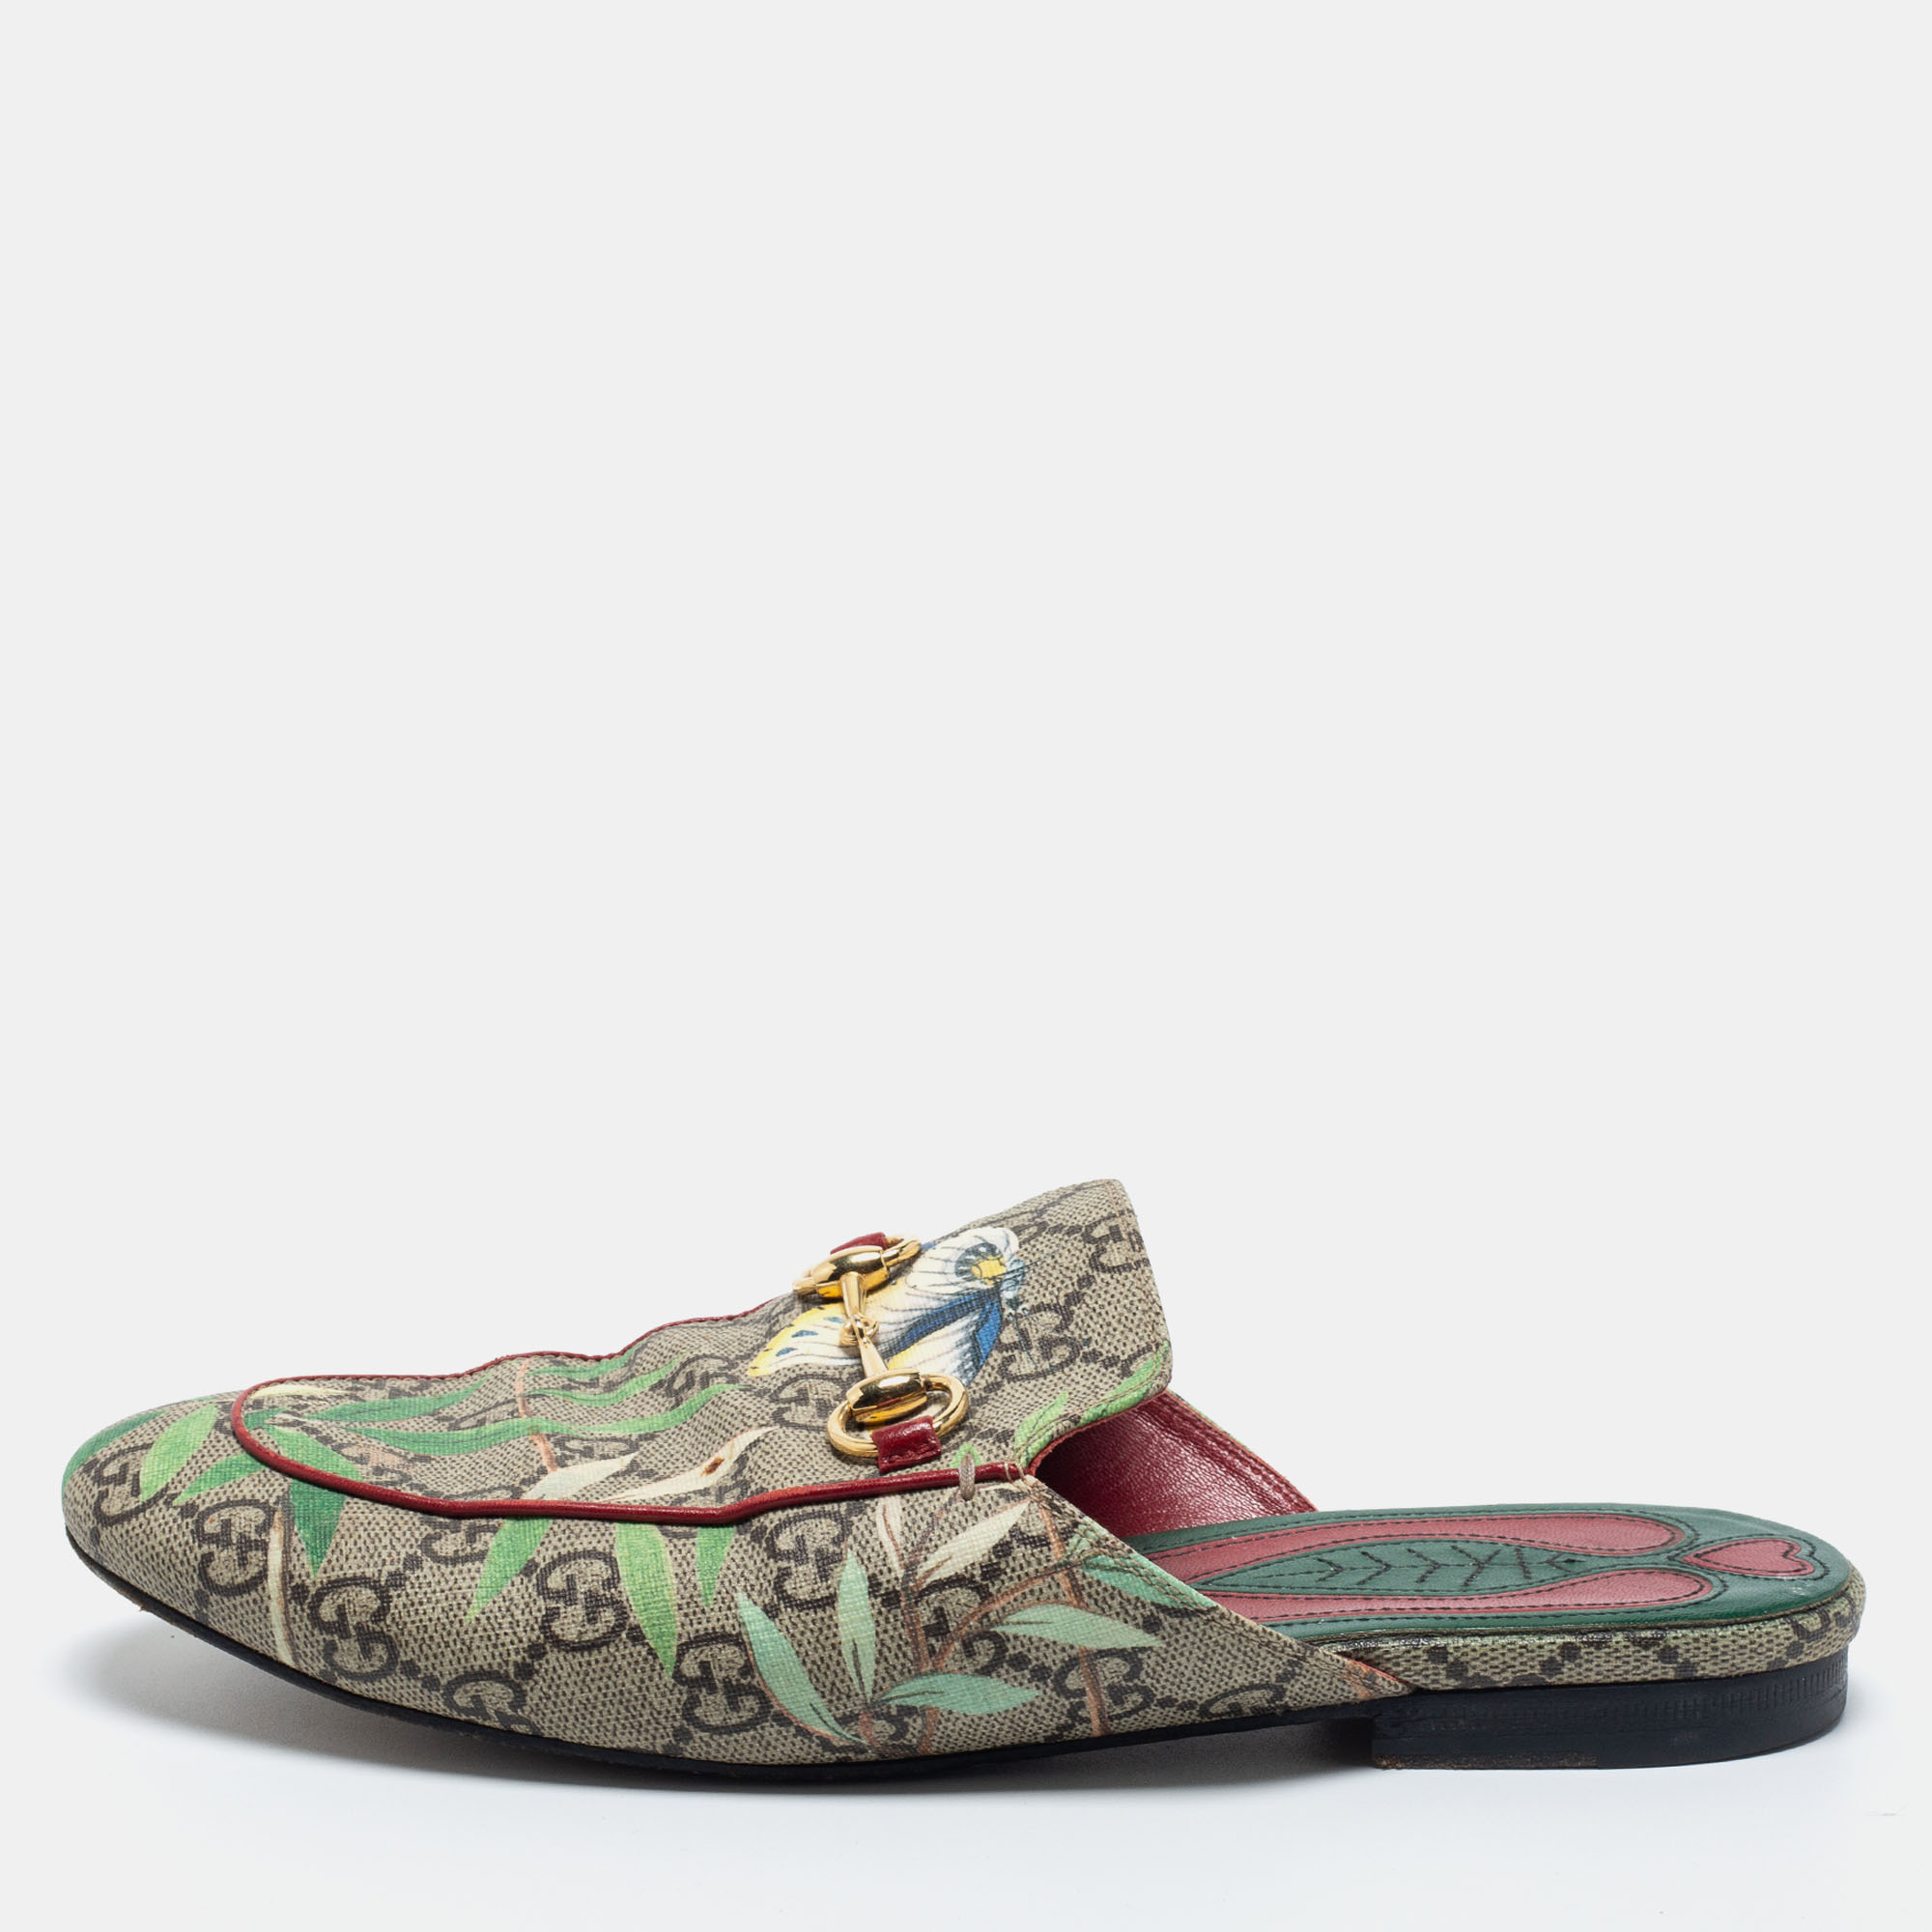 Pre-owned Gucci Multicolor Tian Print Gg Supreme Canvas Princetown Flat Mules Size 37